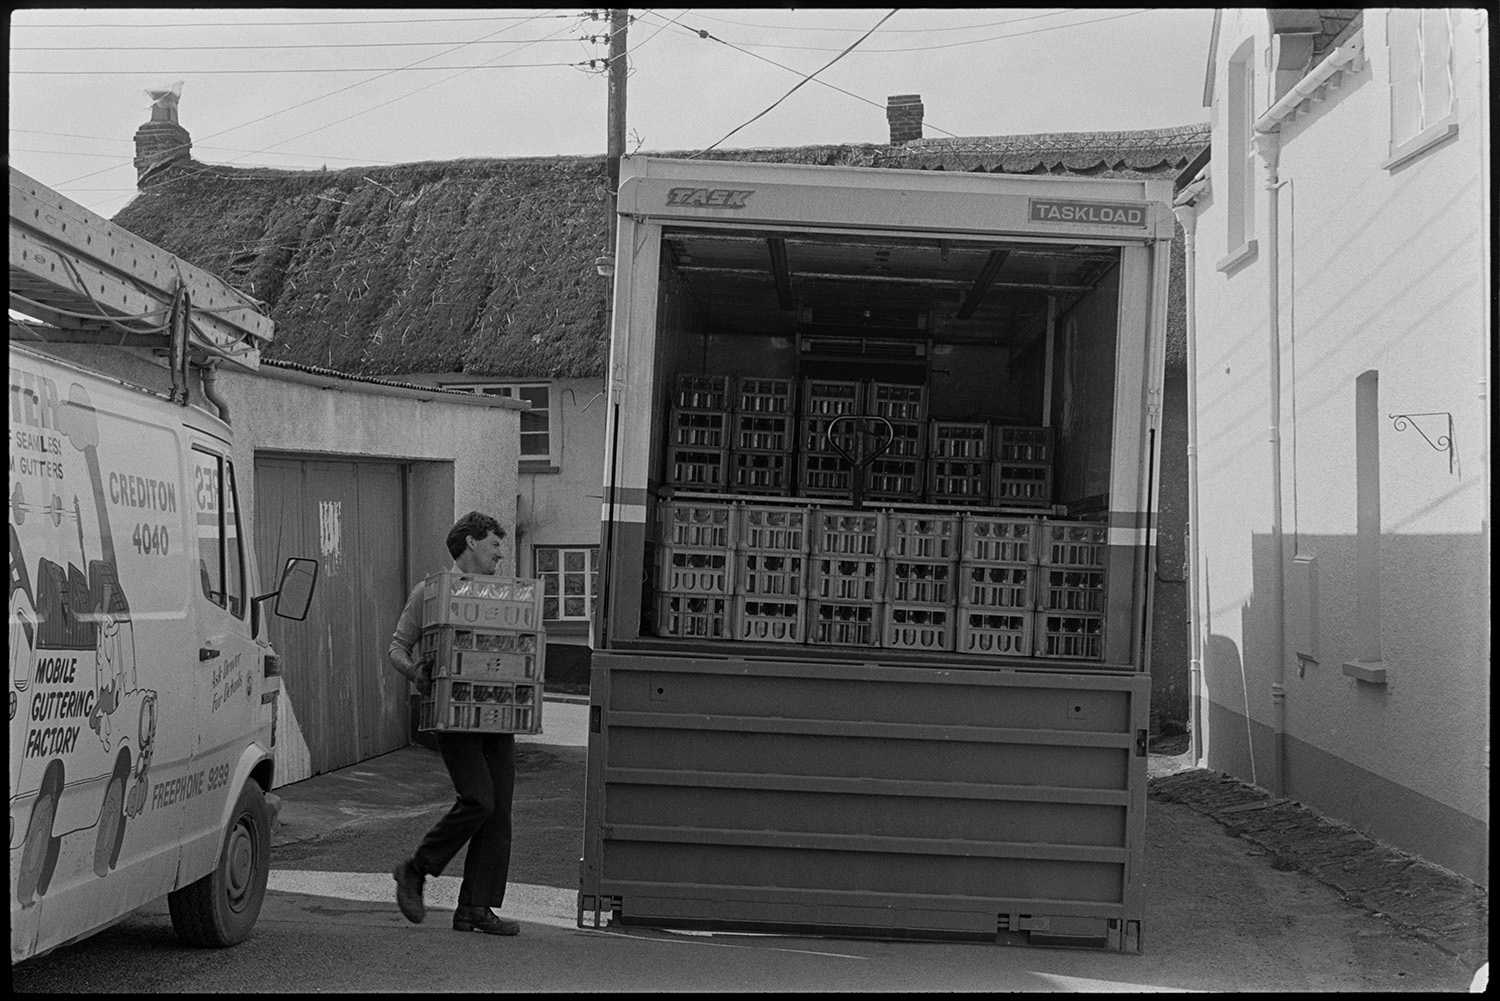 Lorry unloading milk crates.
[A man unloading or loading crates with milk bottles from an Express Dairy lorry parked in New Street, Chulmleigh. There is a van belonging to a gutter repair company parked alongside the lorry, and a row of thatched cottages in the background.]